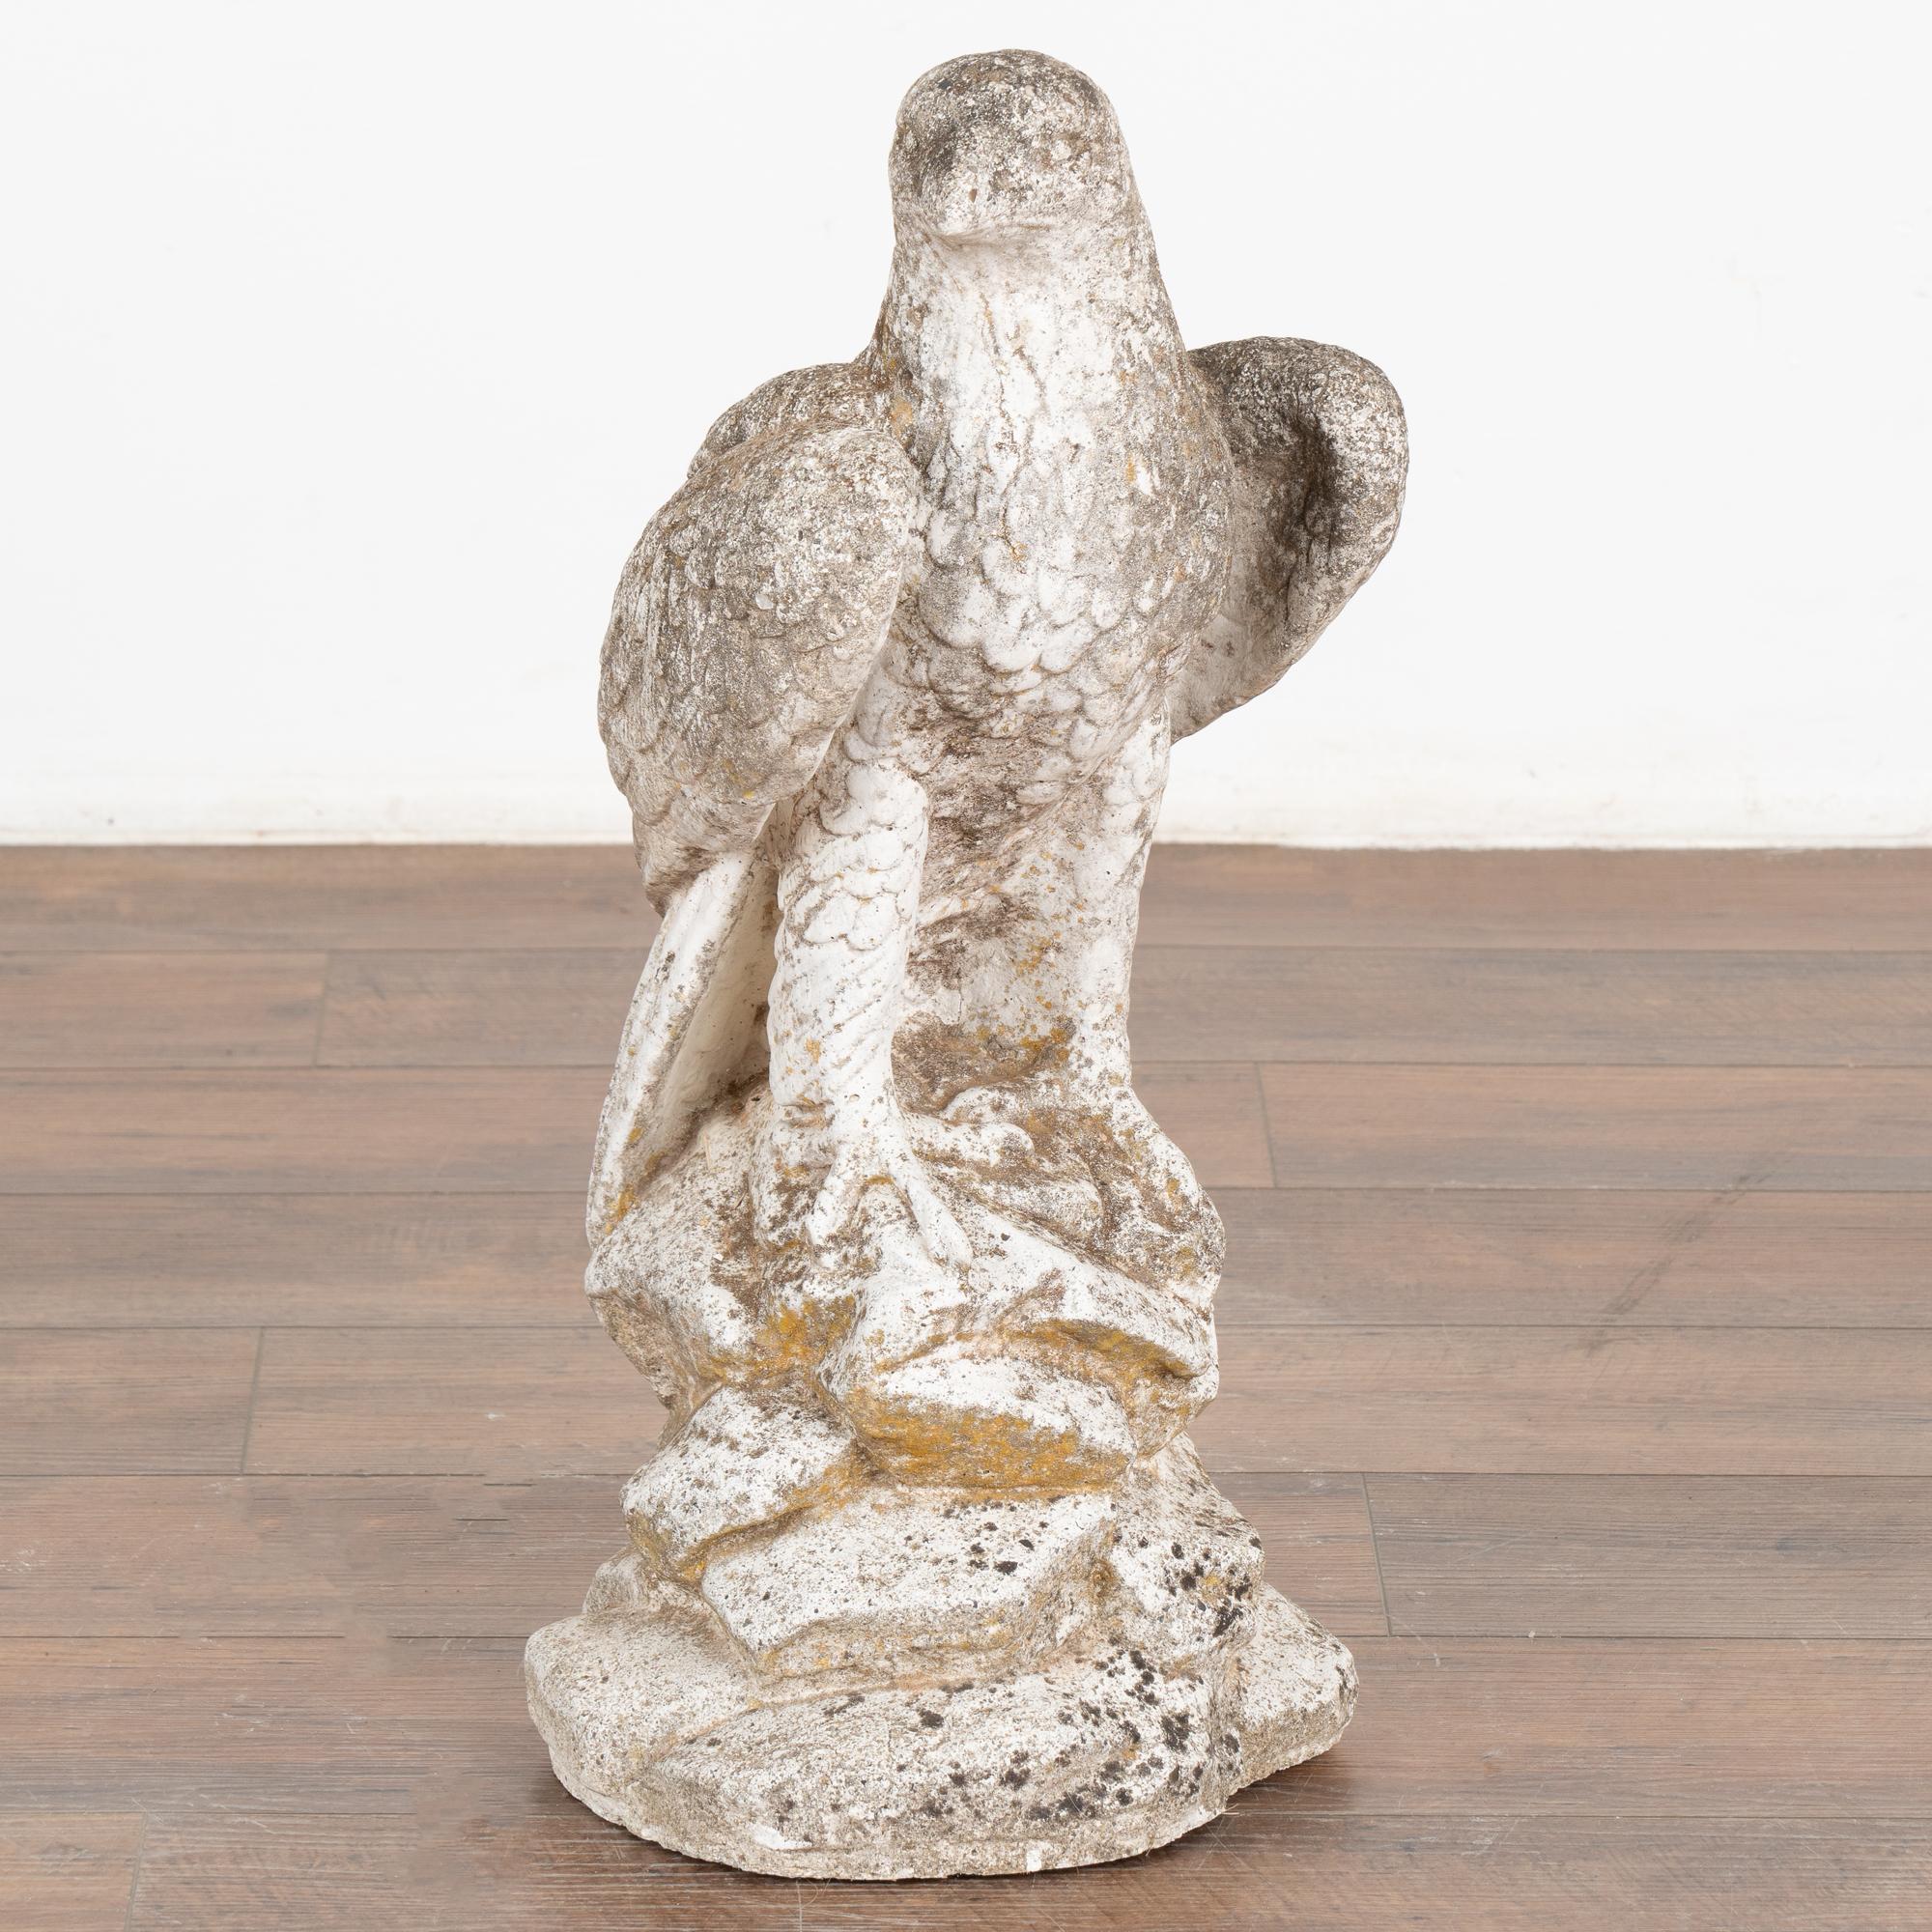 This old limestone eagle statute features handsome carved details, including the nicely textured feathers.
The stone has an expected aged patina, pitting and lichen/stains throughout.
Please note that this piece is solid and quite heavy, and ready